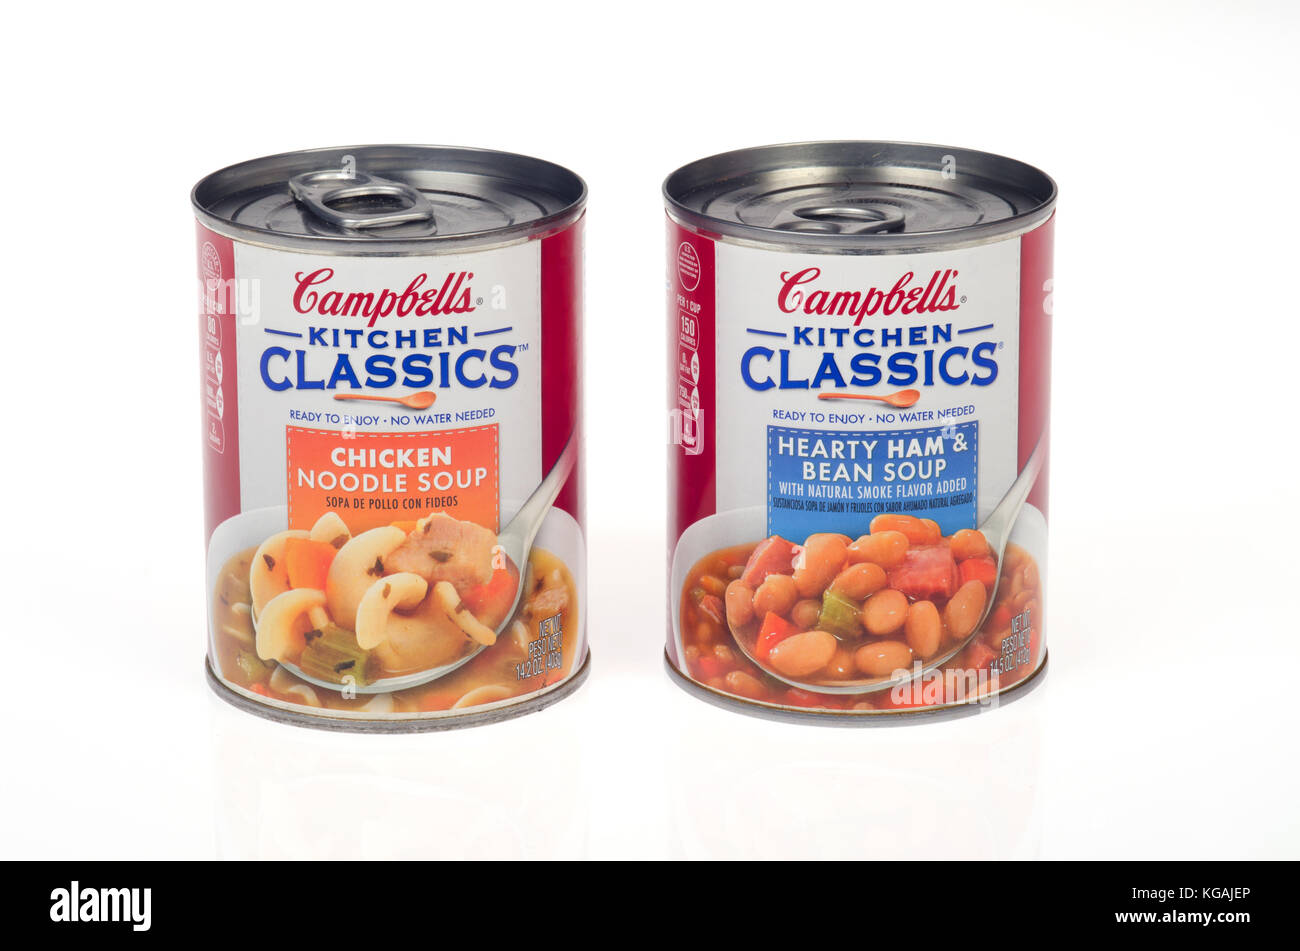 2 cans of Campbell’s Kitchen Classics soup, 1 Chicken Noodle and 1 Hearty Ham and Bean Stock Photo